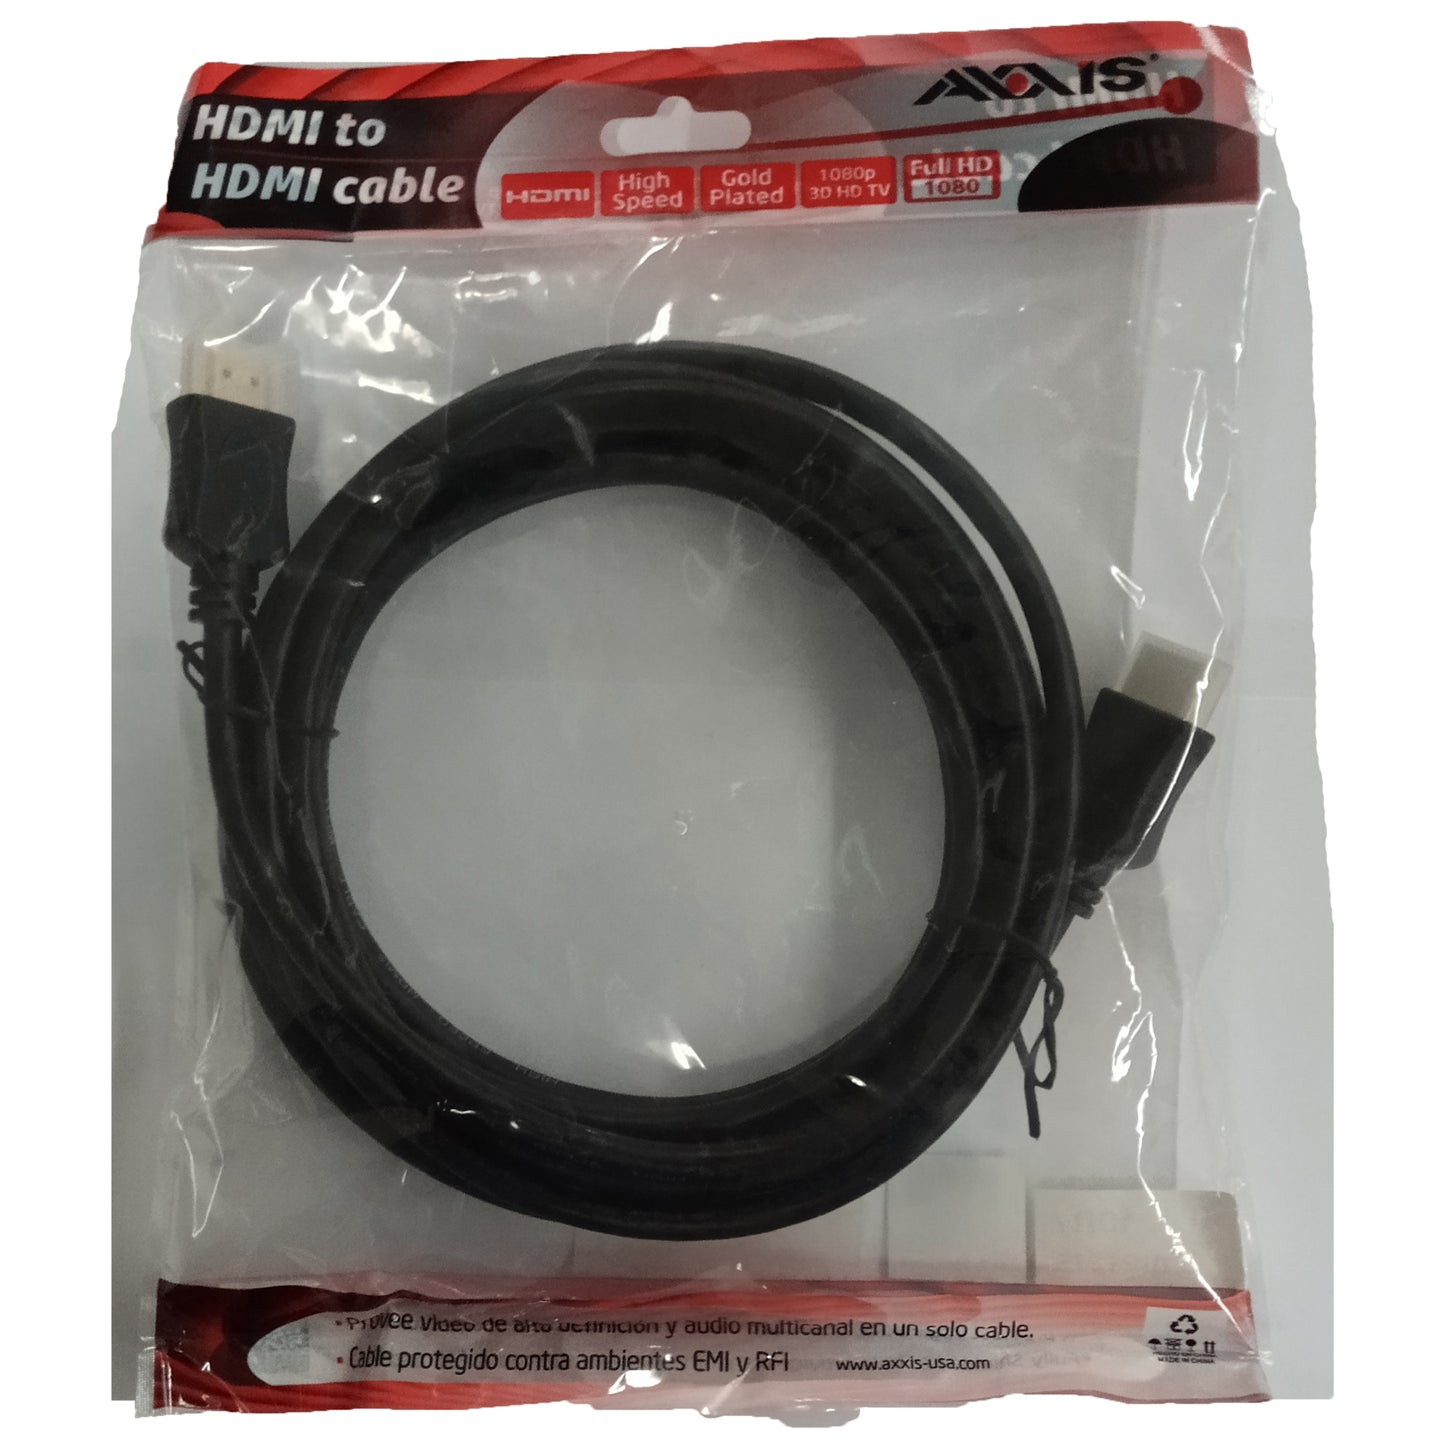 Cable HDMI Axxis 3mts 10 pies Puntas de Oro